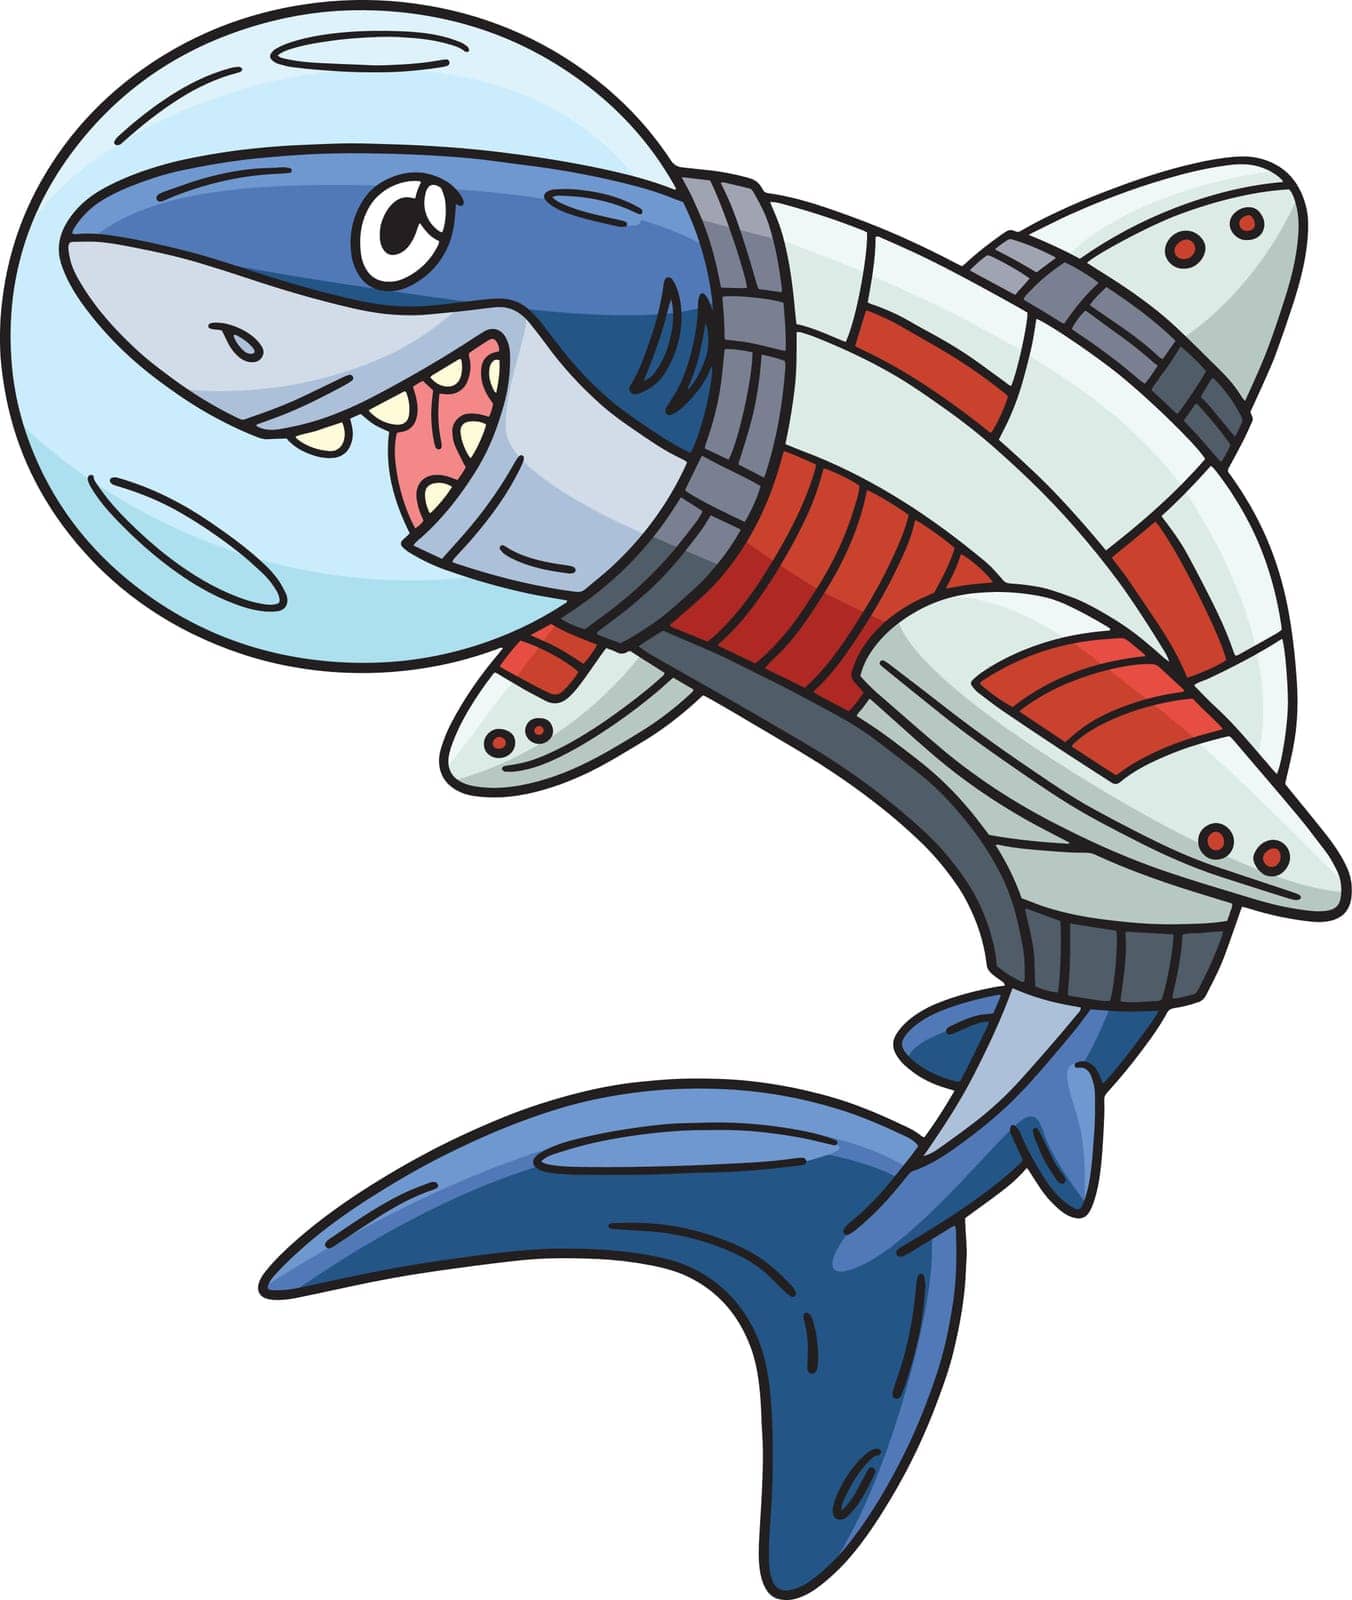 Space Shark Cartoon Colored Clipart Illustration by abbydesign